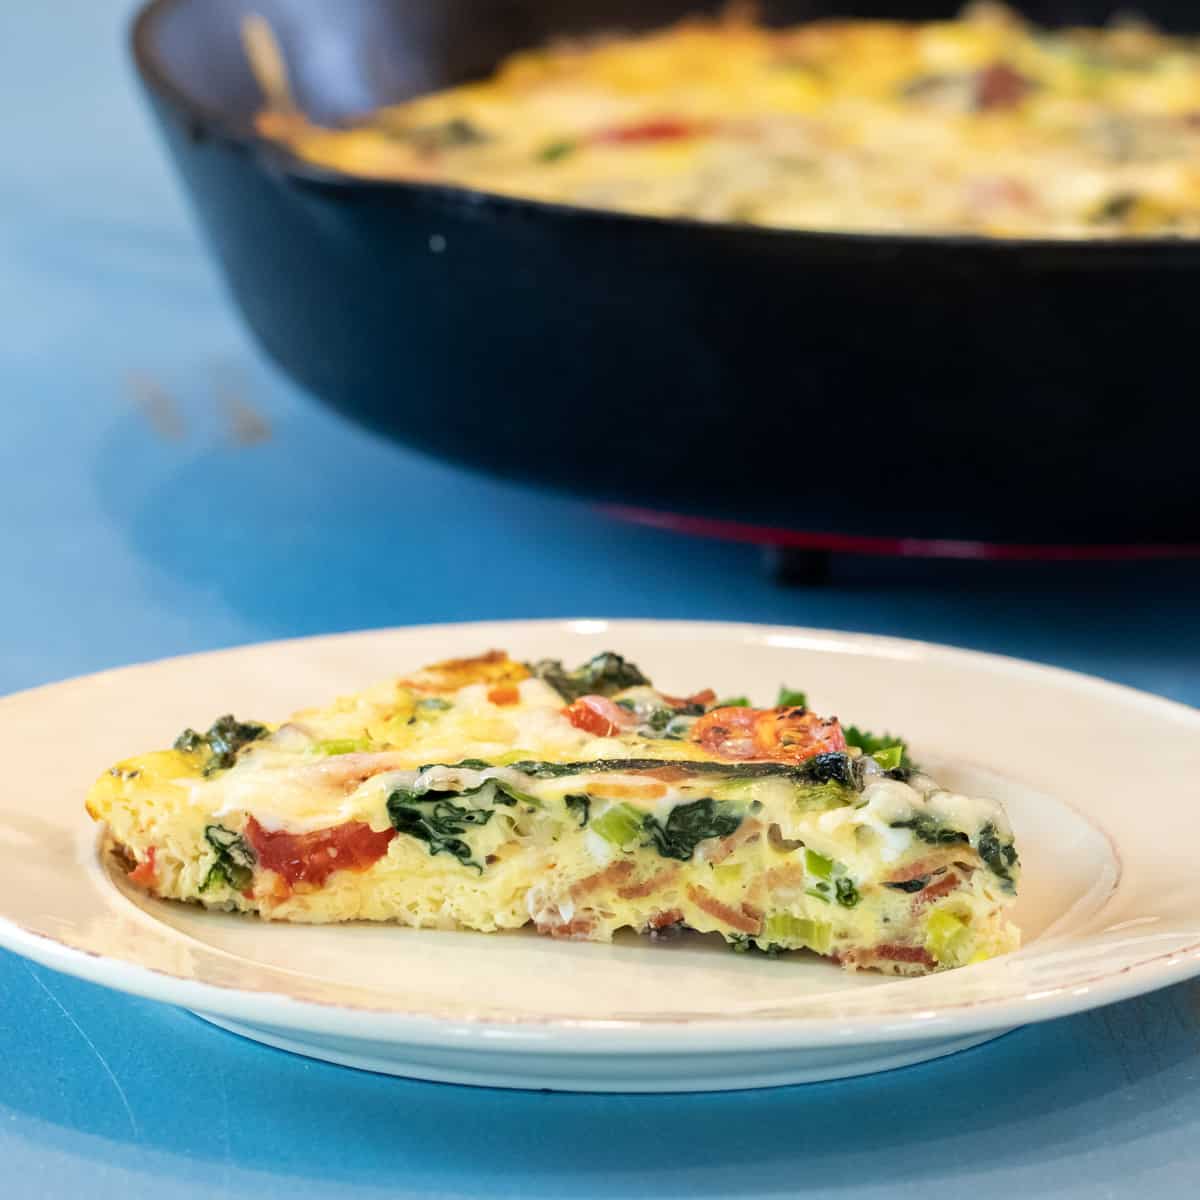 A slice of a frittata on a plate.